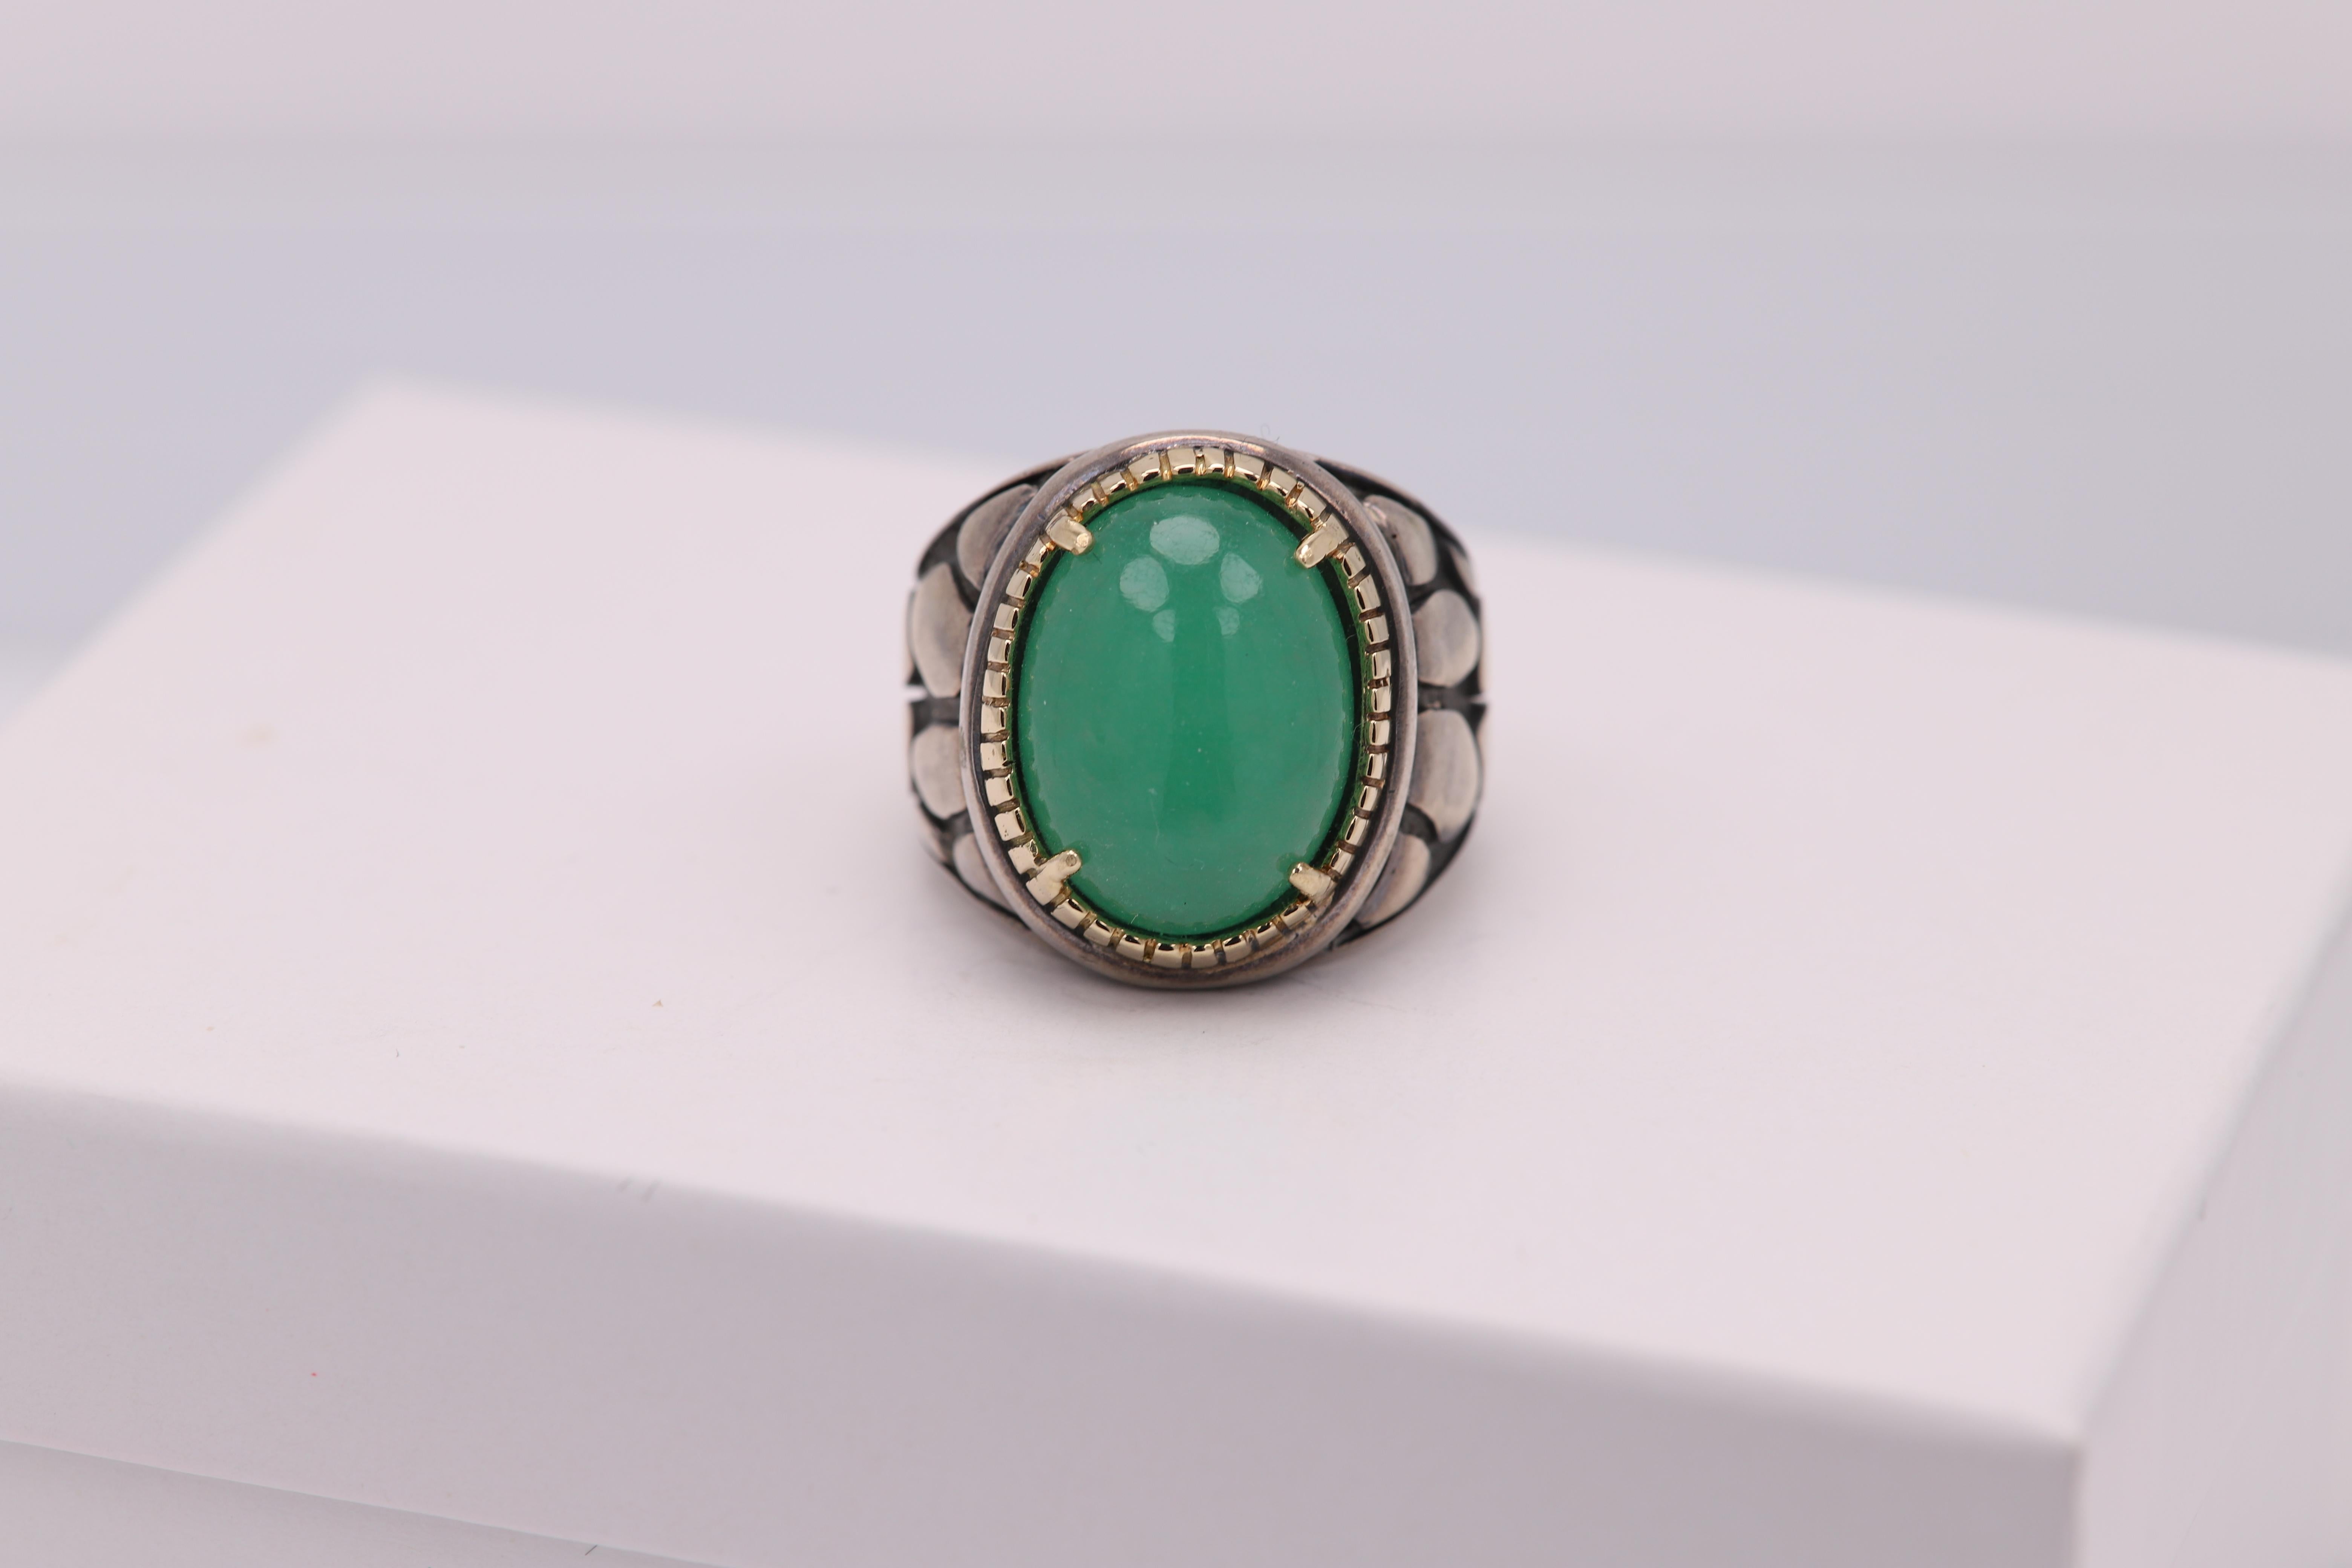 Cabochon Treated Jade Ring Sterling Silver 925 and 18 Karat Gold Green Jade Jewelry For Sale